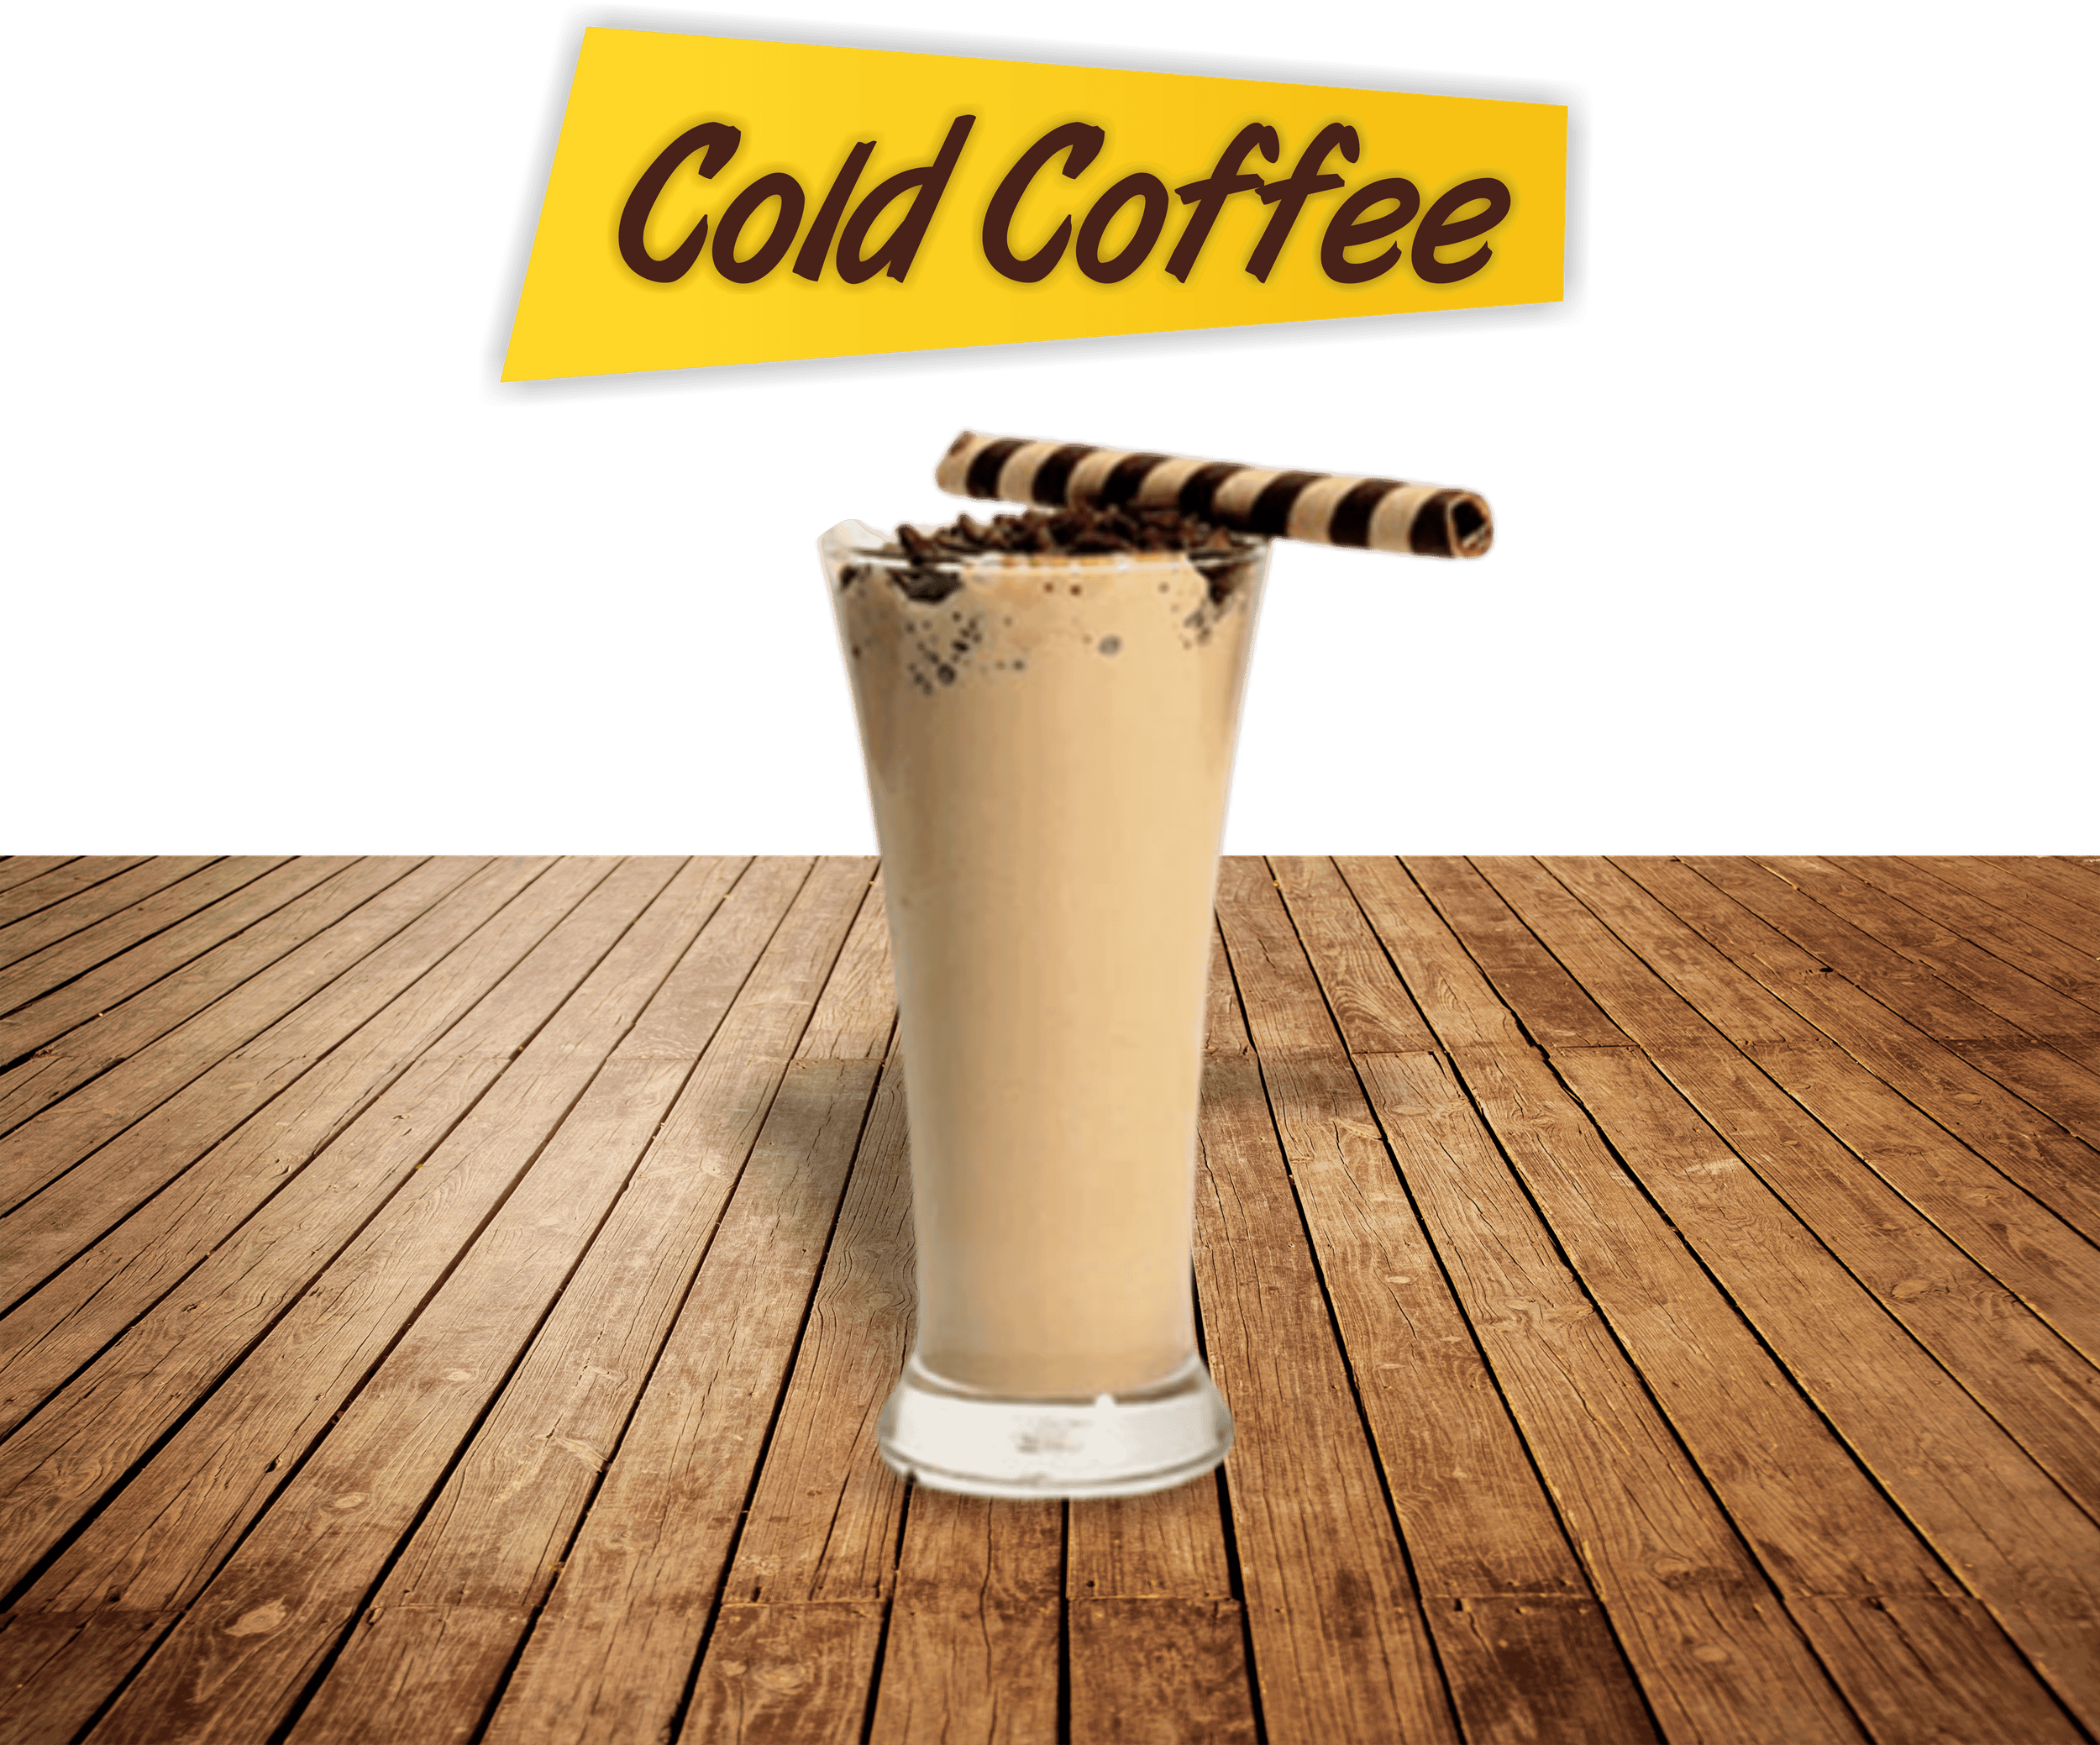 Cold Coffee_11zon (1)